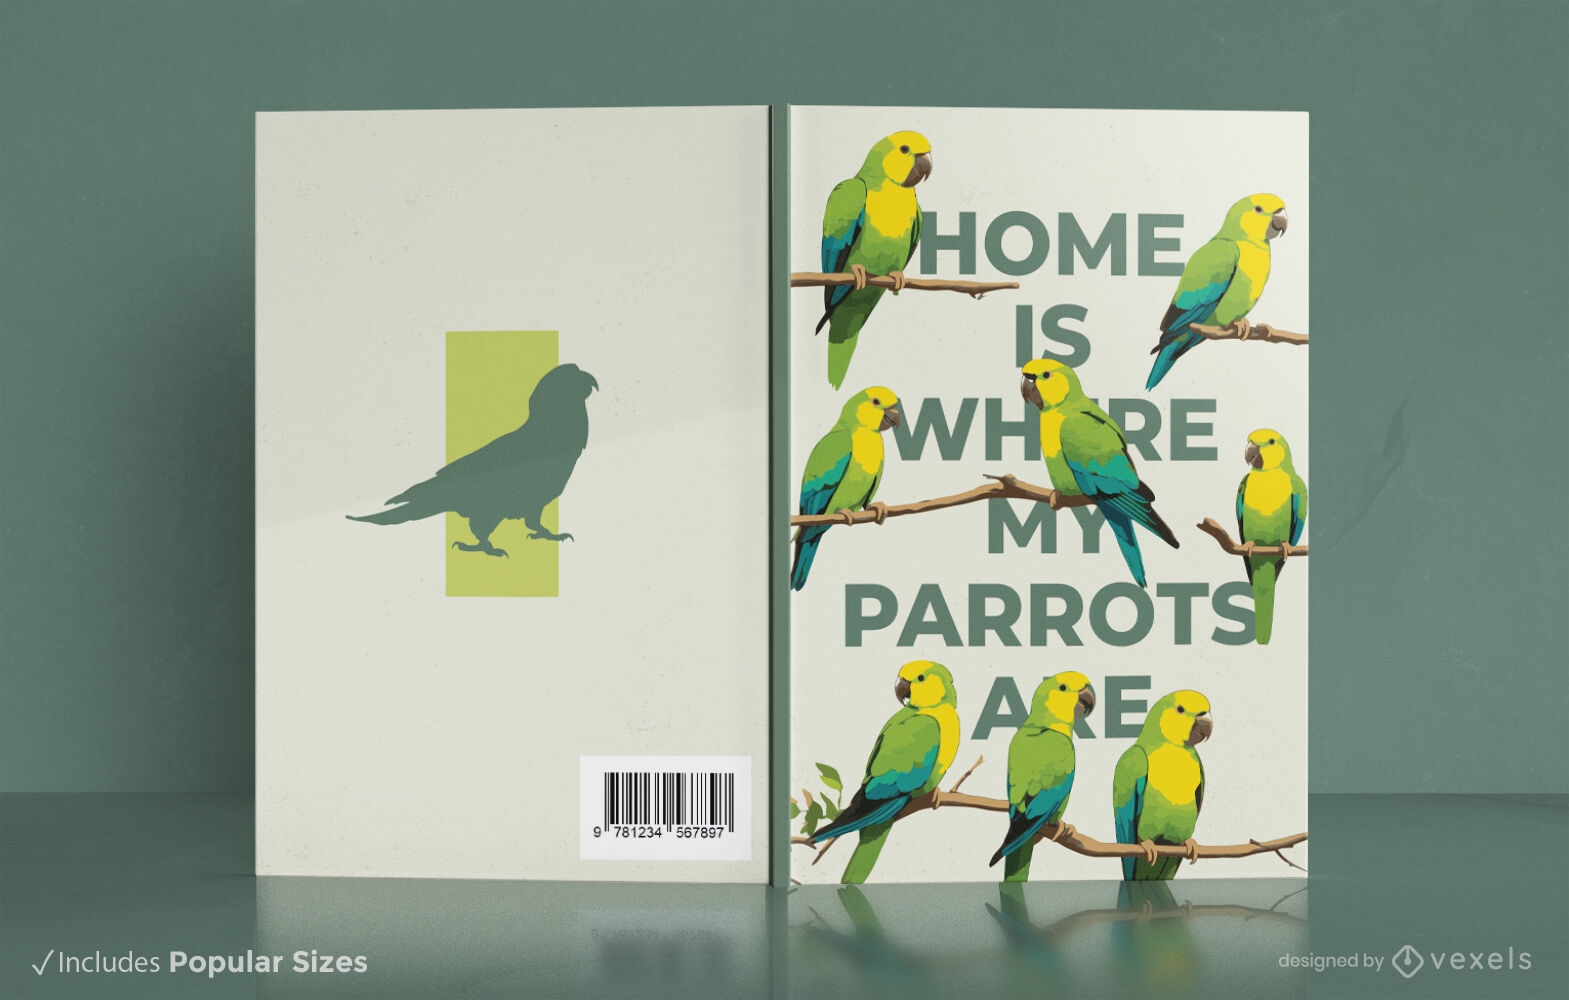 Parrot-themed book cover design